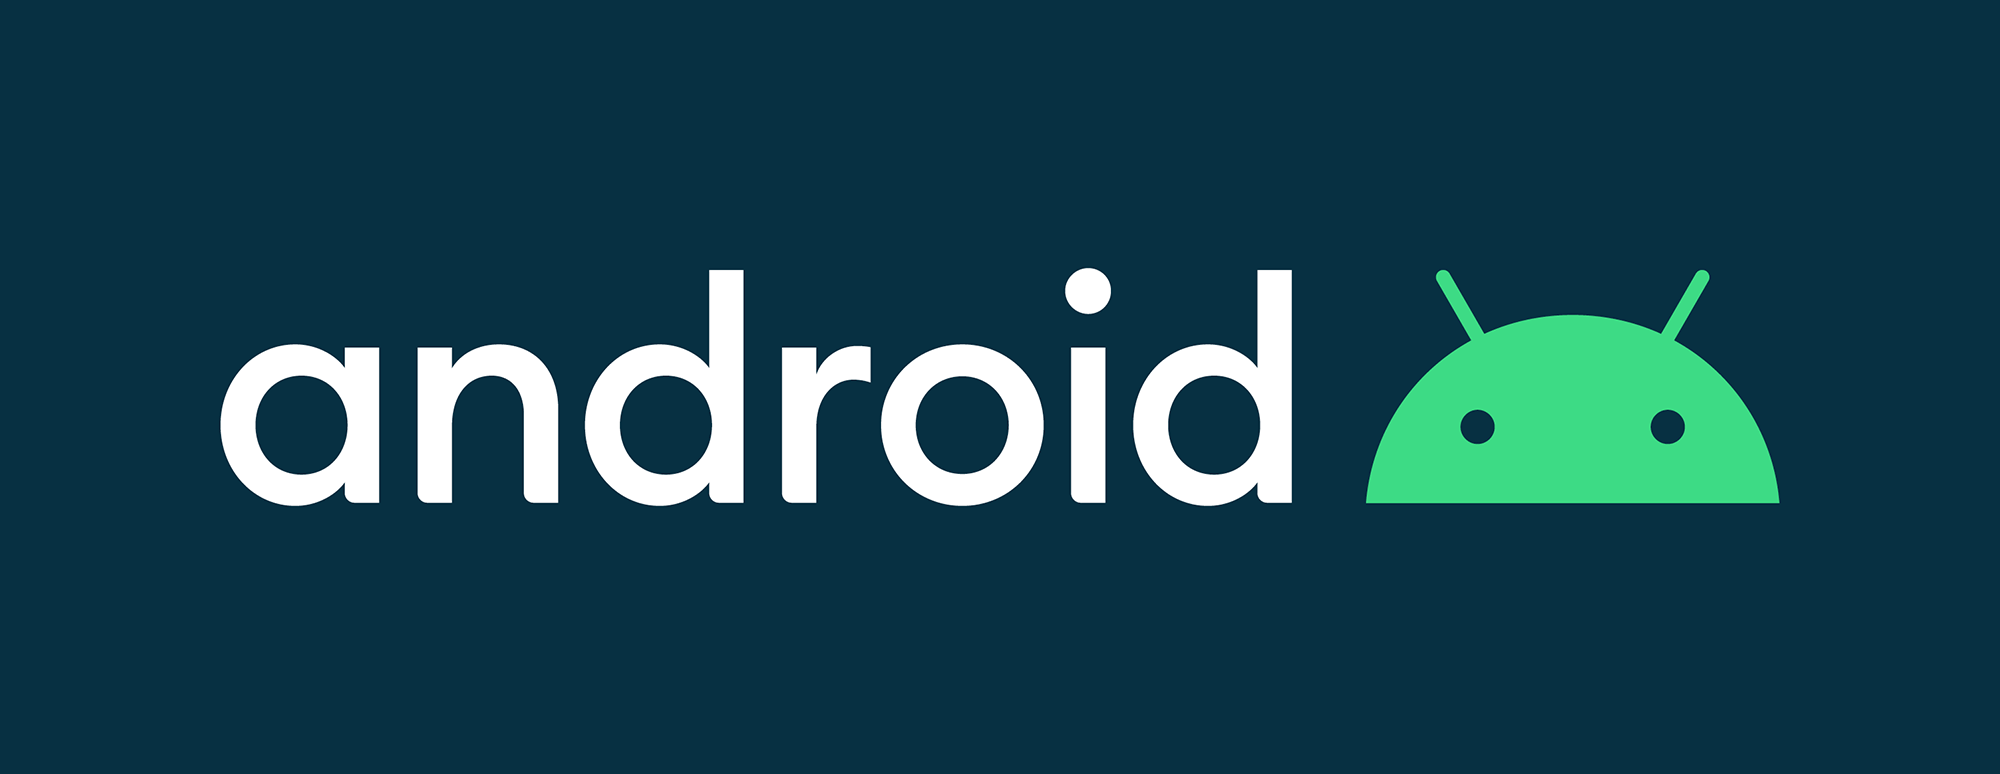 Android字体系列 （一）：Android字体基础 - 掘金